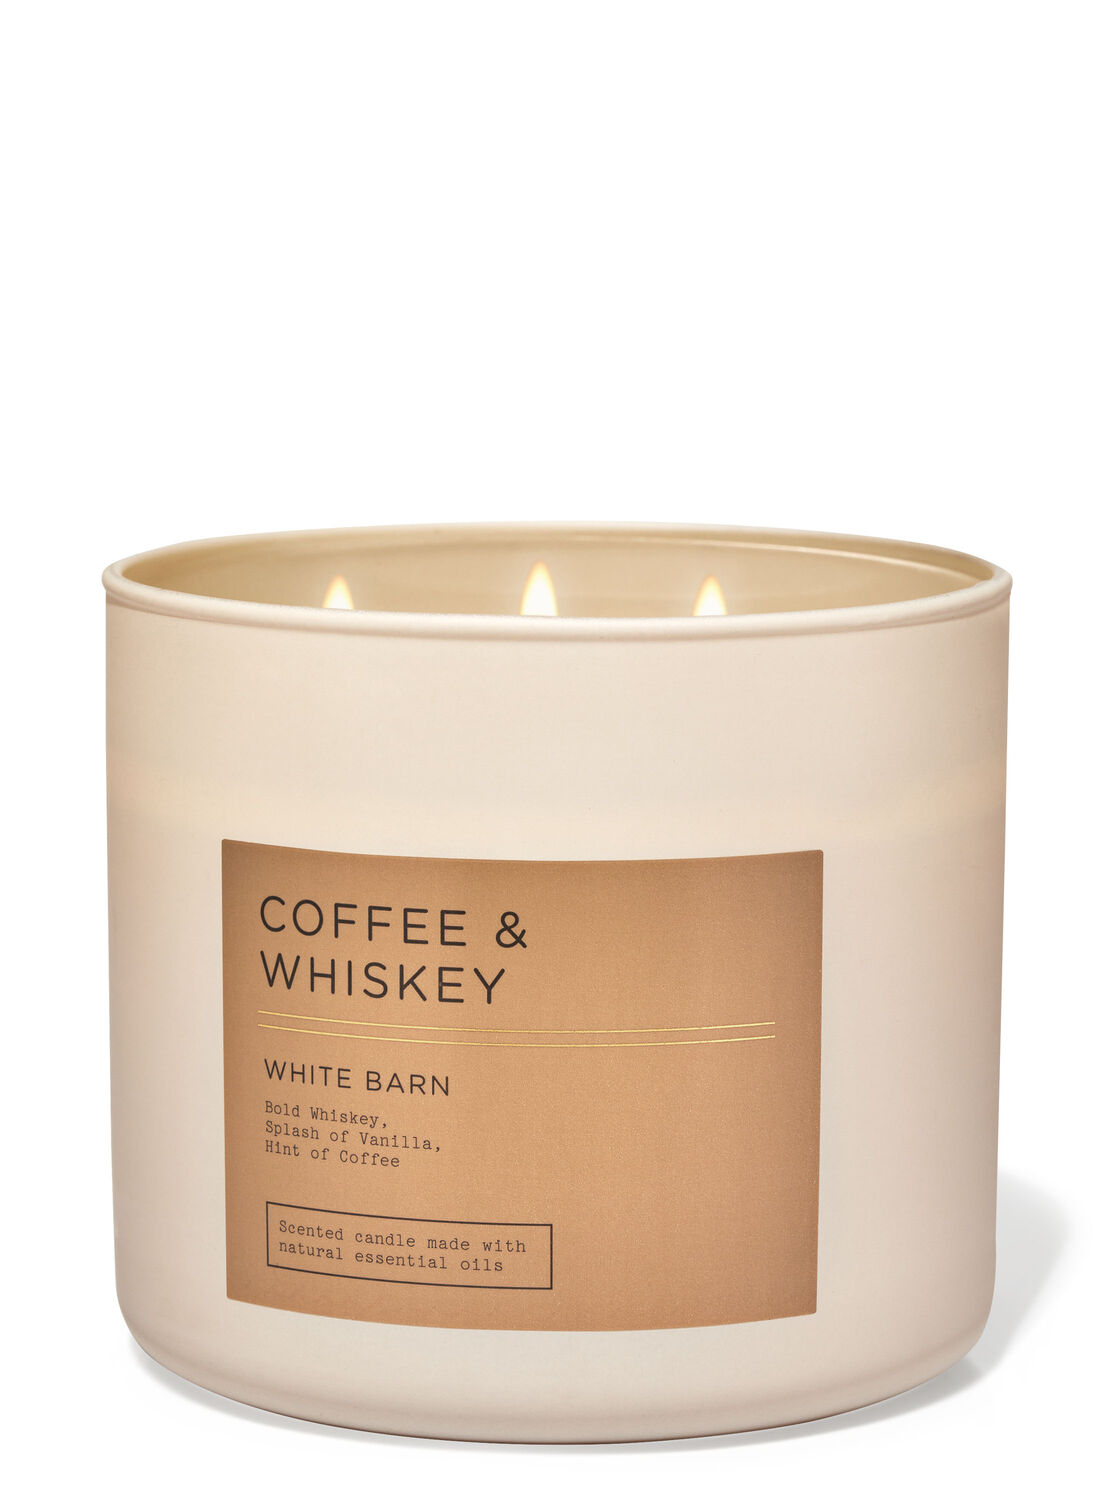 Ww Candle, Cafe Sweets - 1 candle, 16 oz